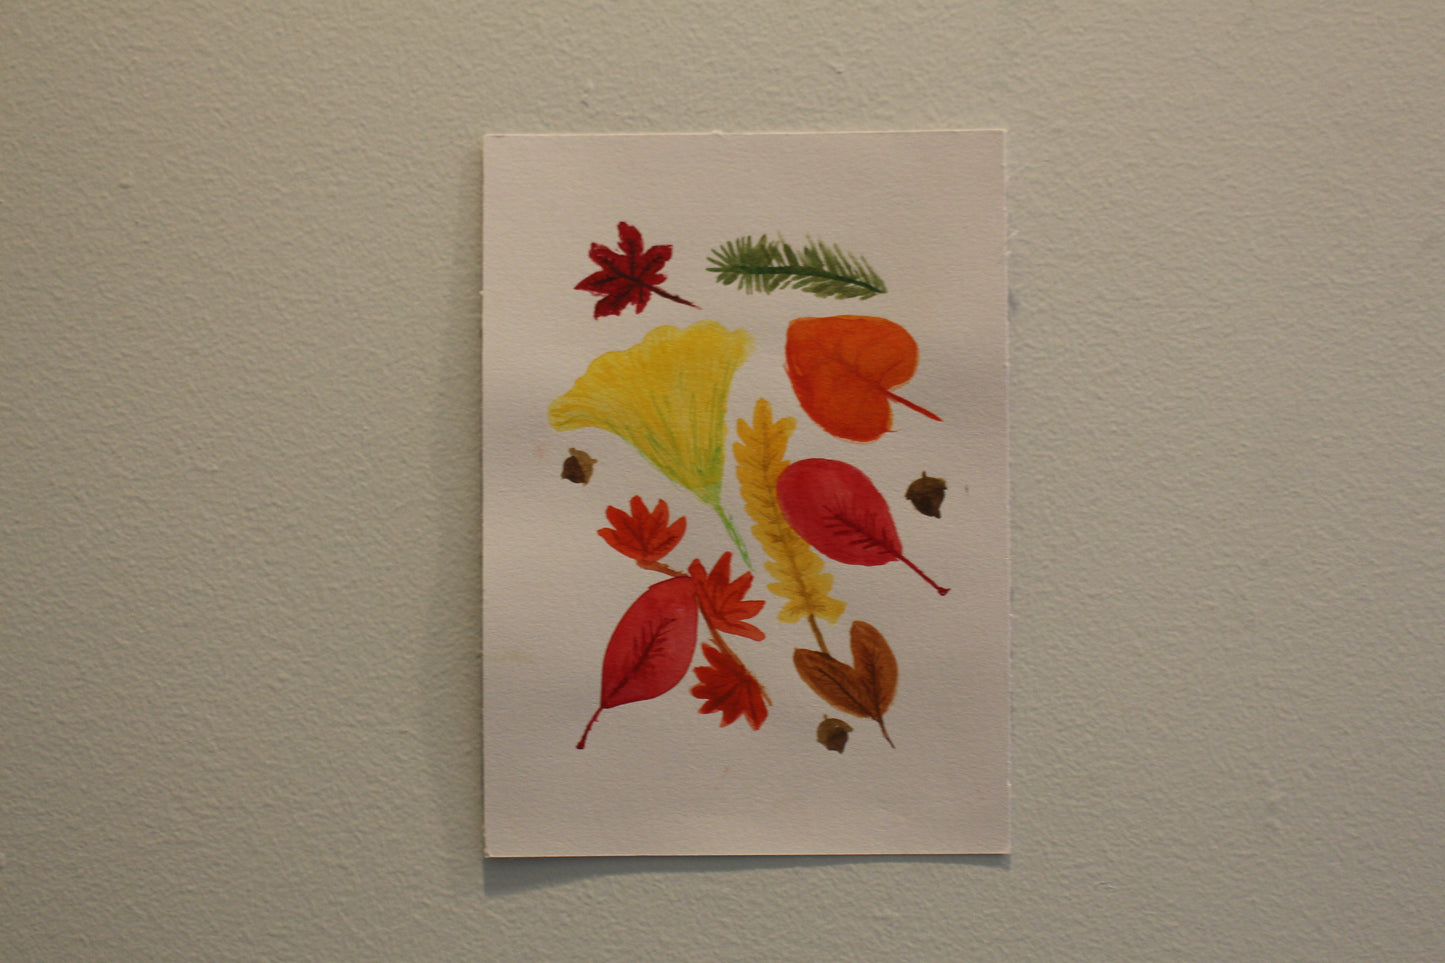 Fall Leaves Collection Painting